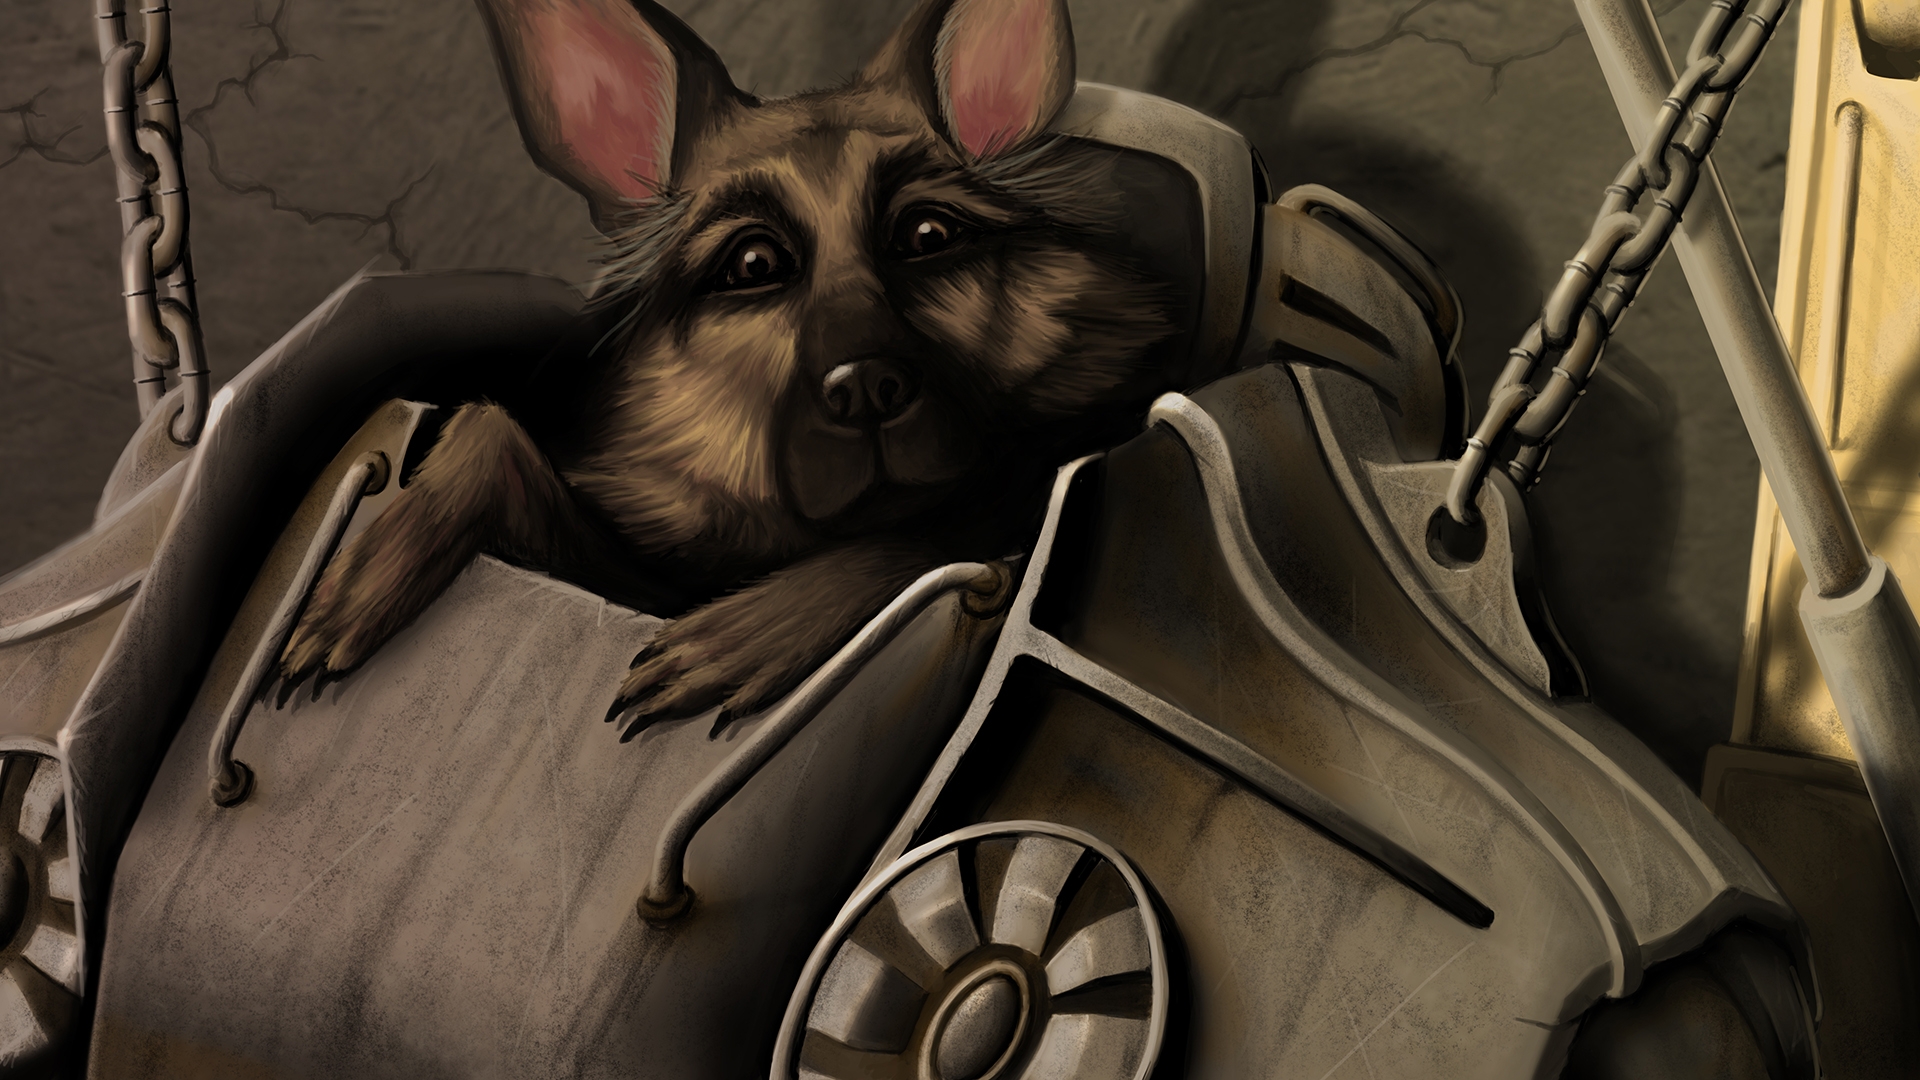 Wallpapers fallout 4 painting dogmeat on the desktop